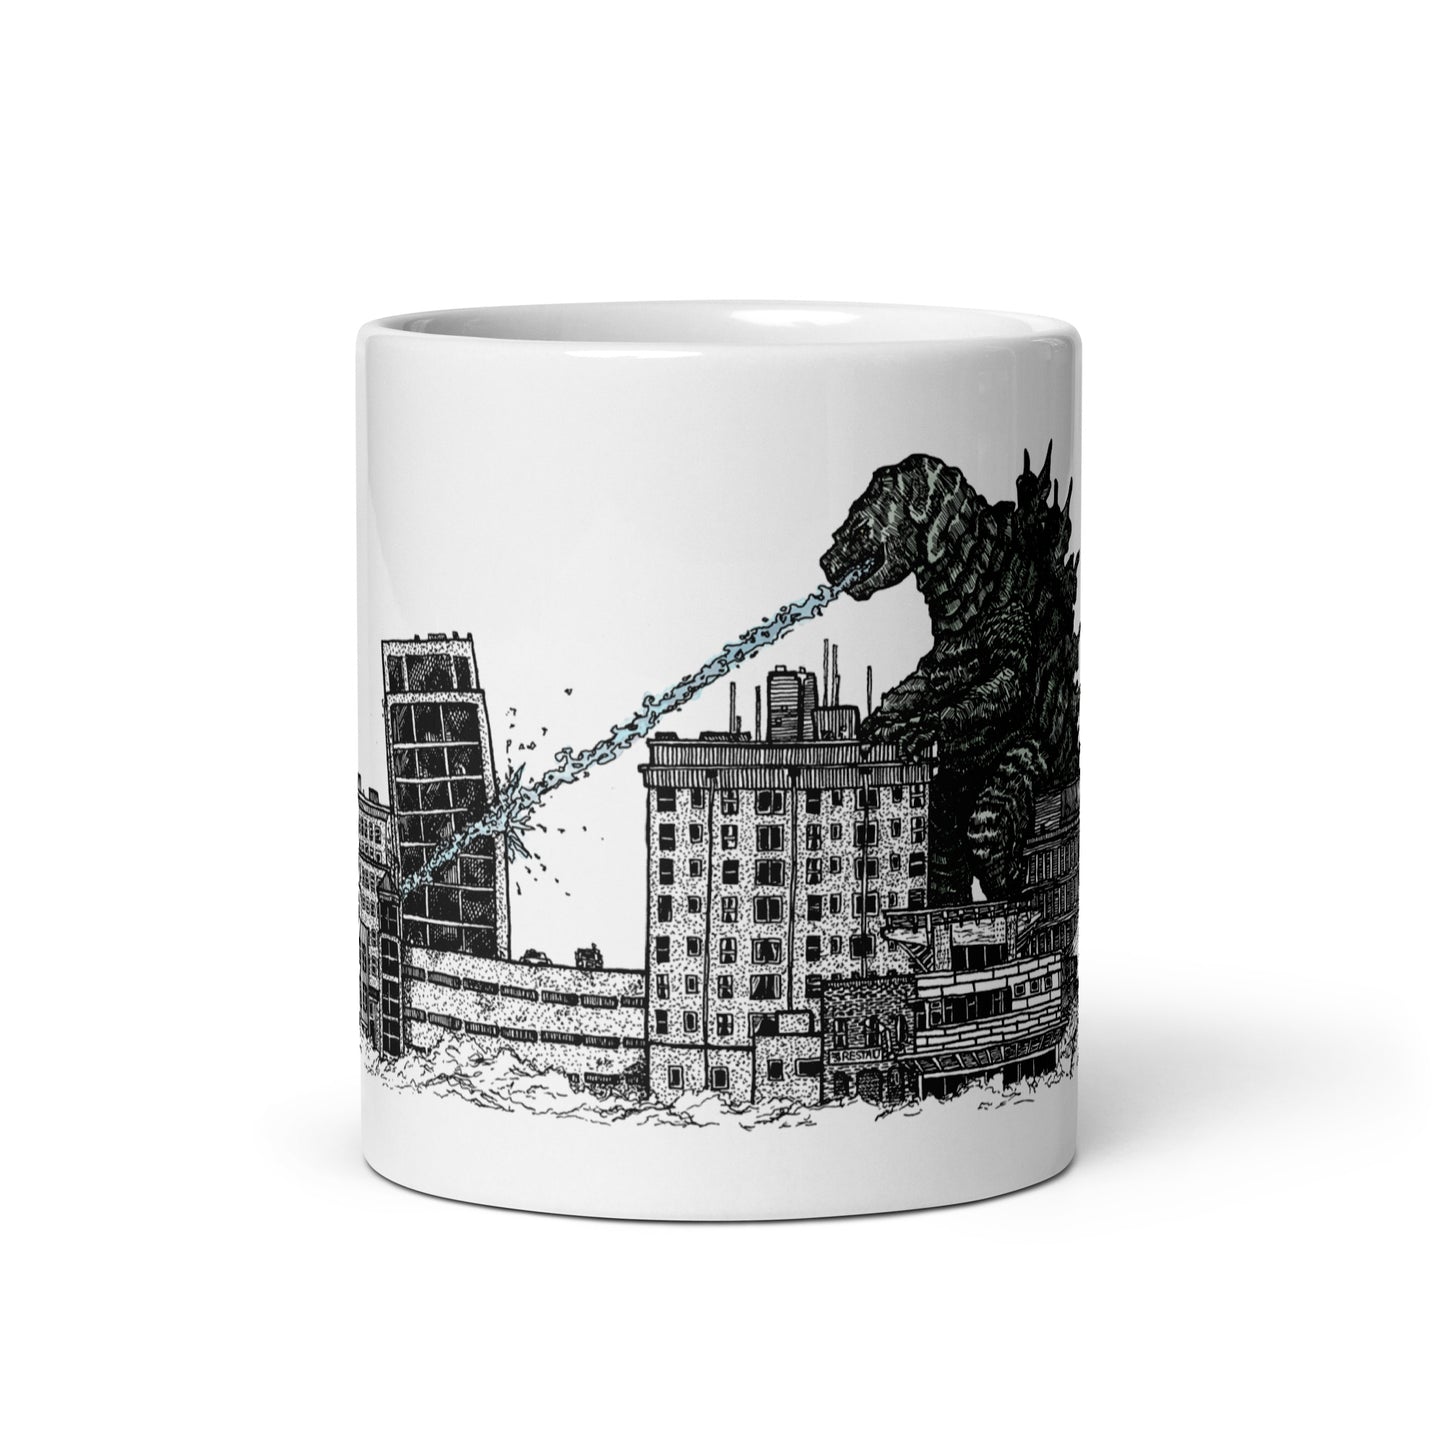 BellavanceInk: Coffee Mug With Pen & Ink Watercolor Sketch Of Giant Monster Attacking The Abandoned Landmark Hotel In Charlottesville